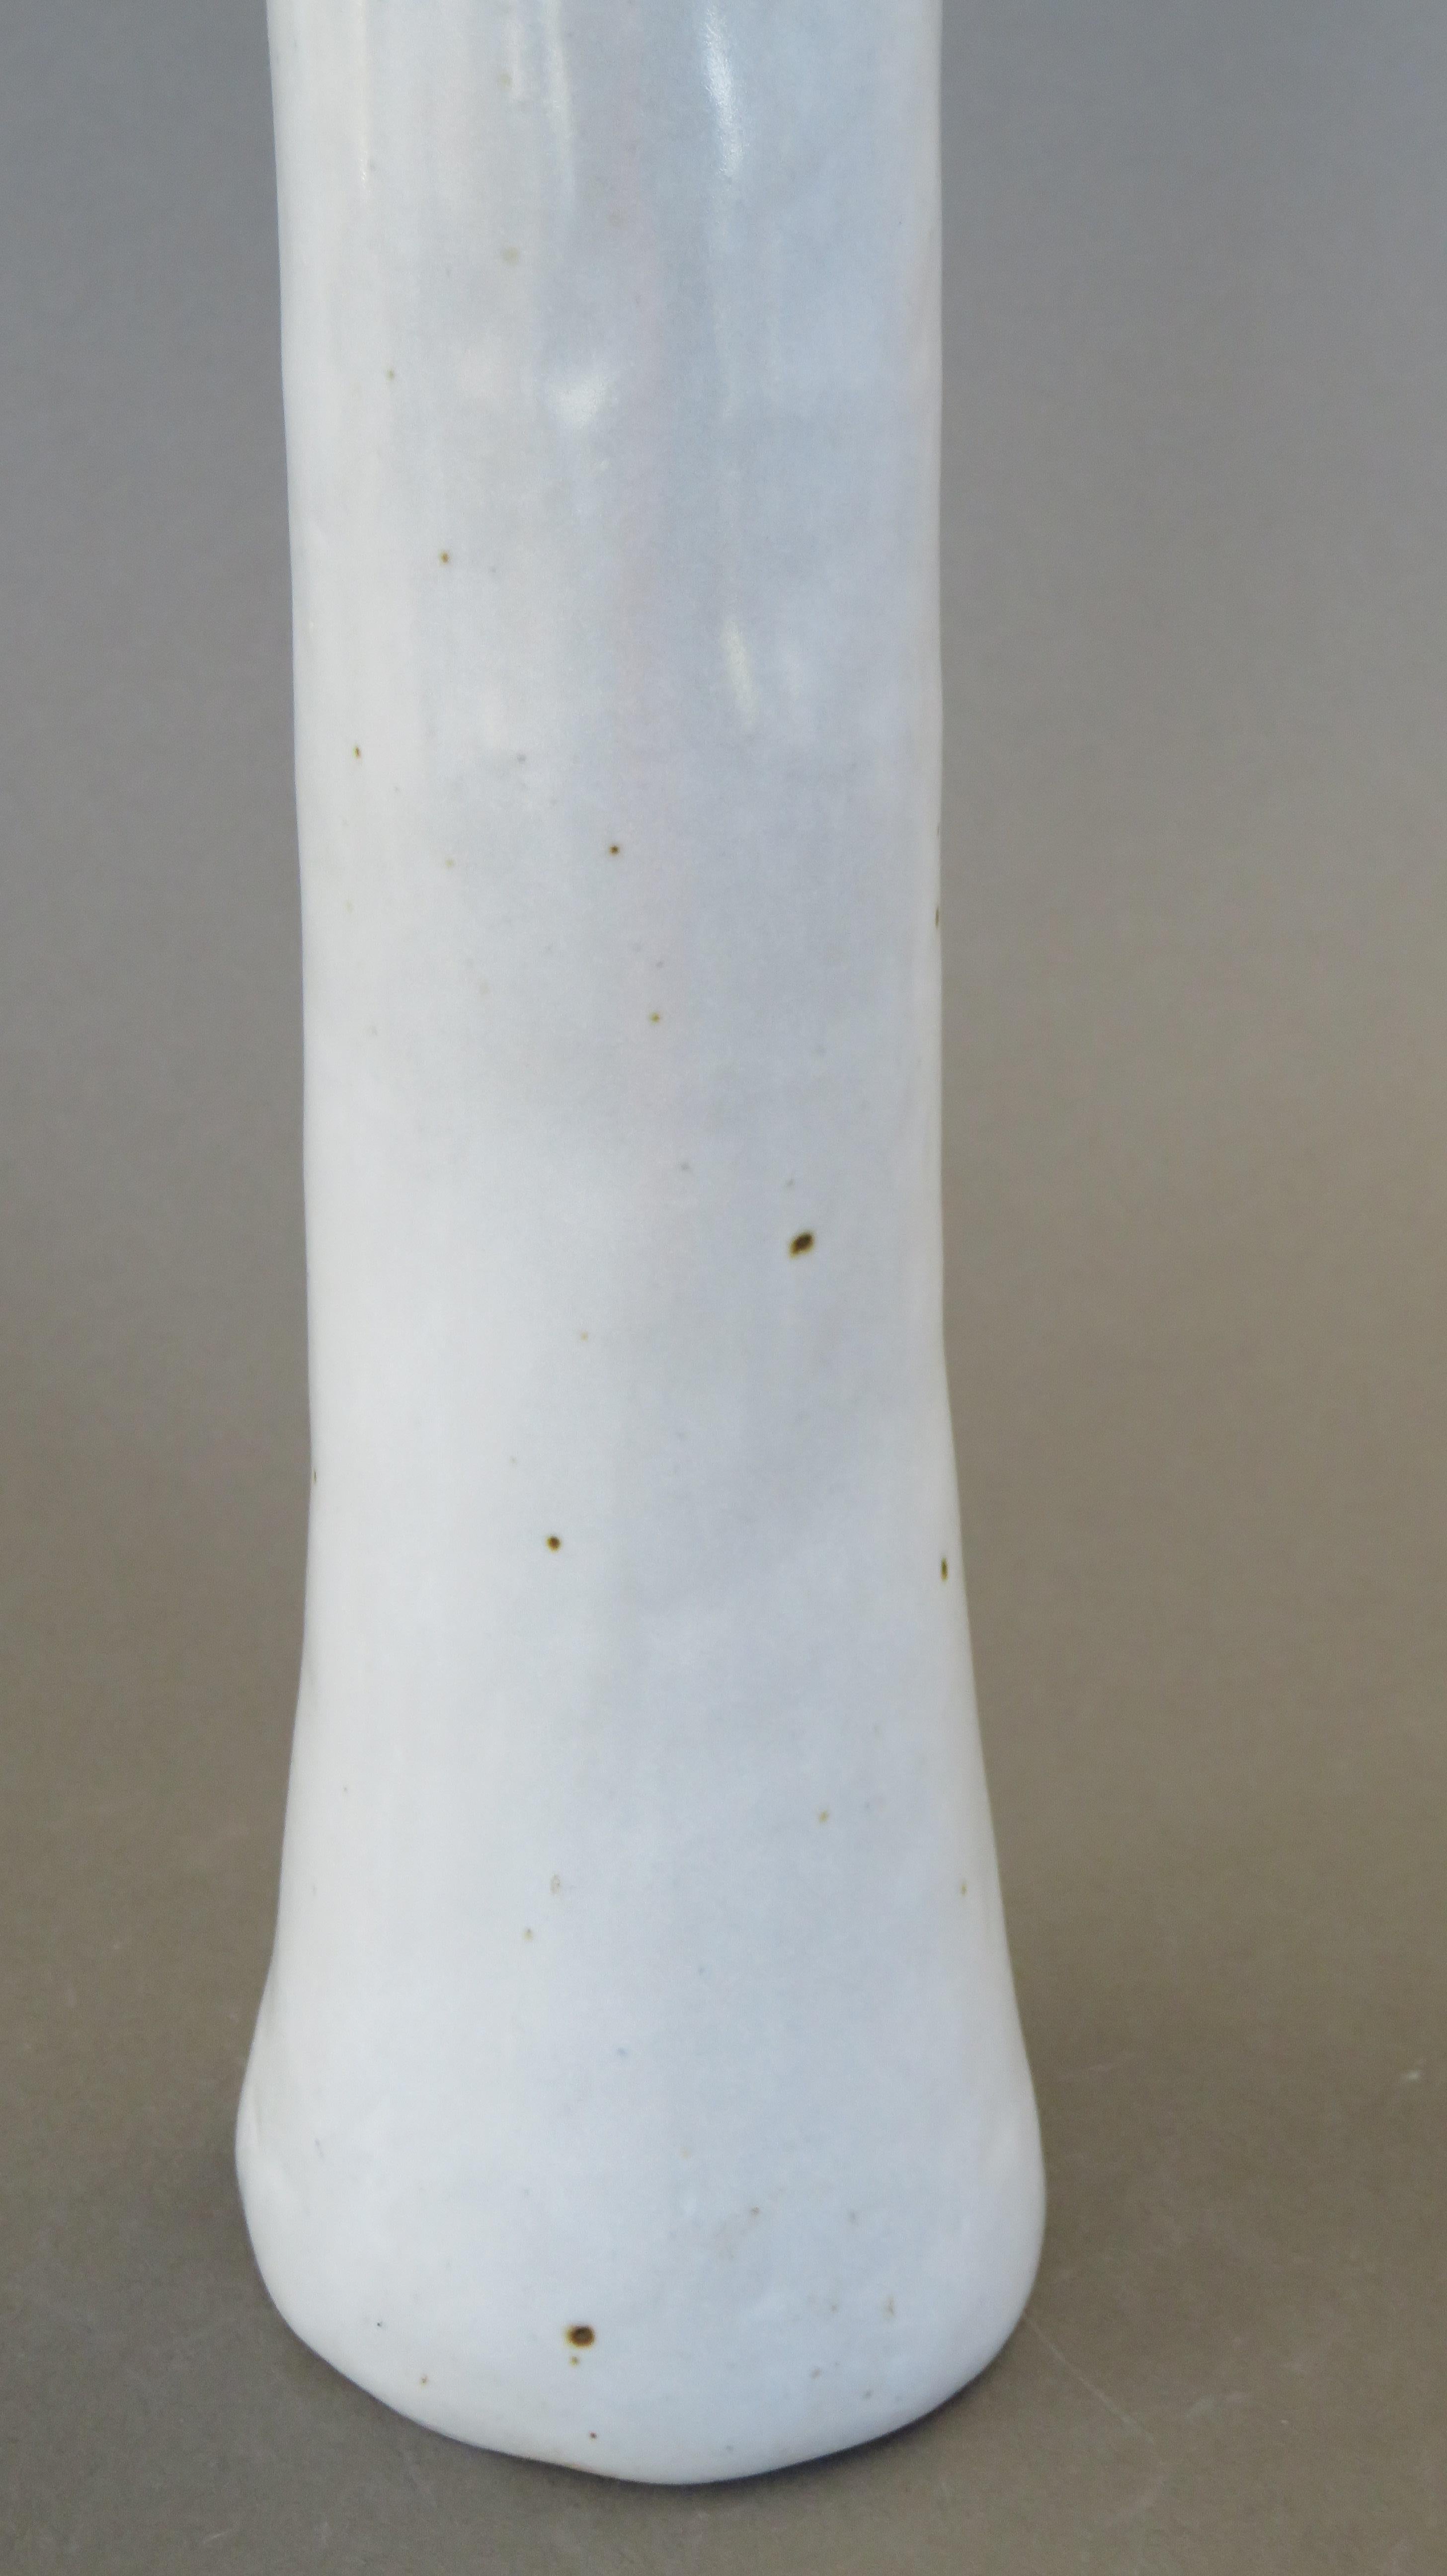 Tall Hand Built Ceramic Vase, White Glaze on Stoneware, 22.88 Inches Tall In Good Condition For Sale In New York, NY